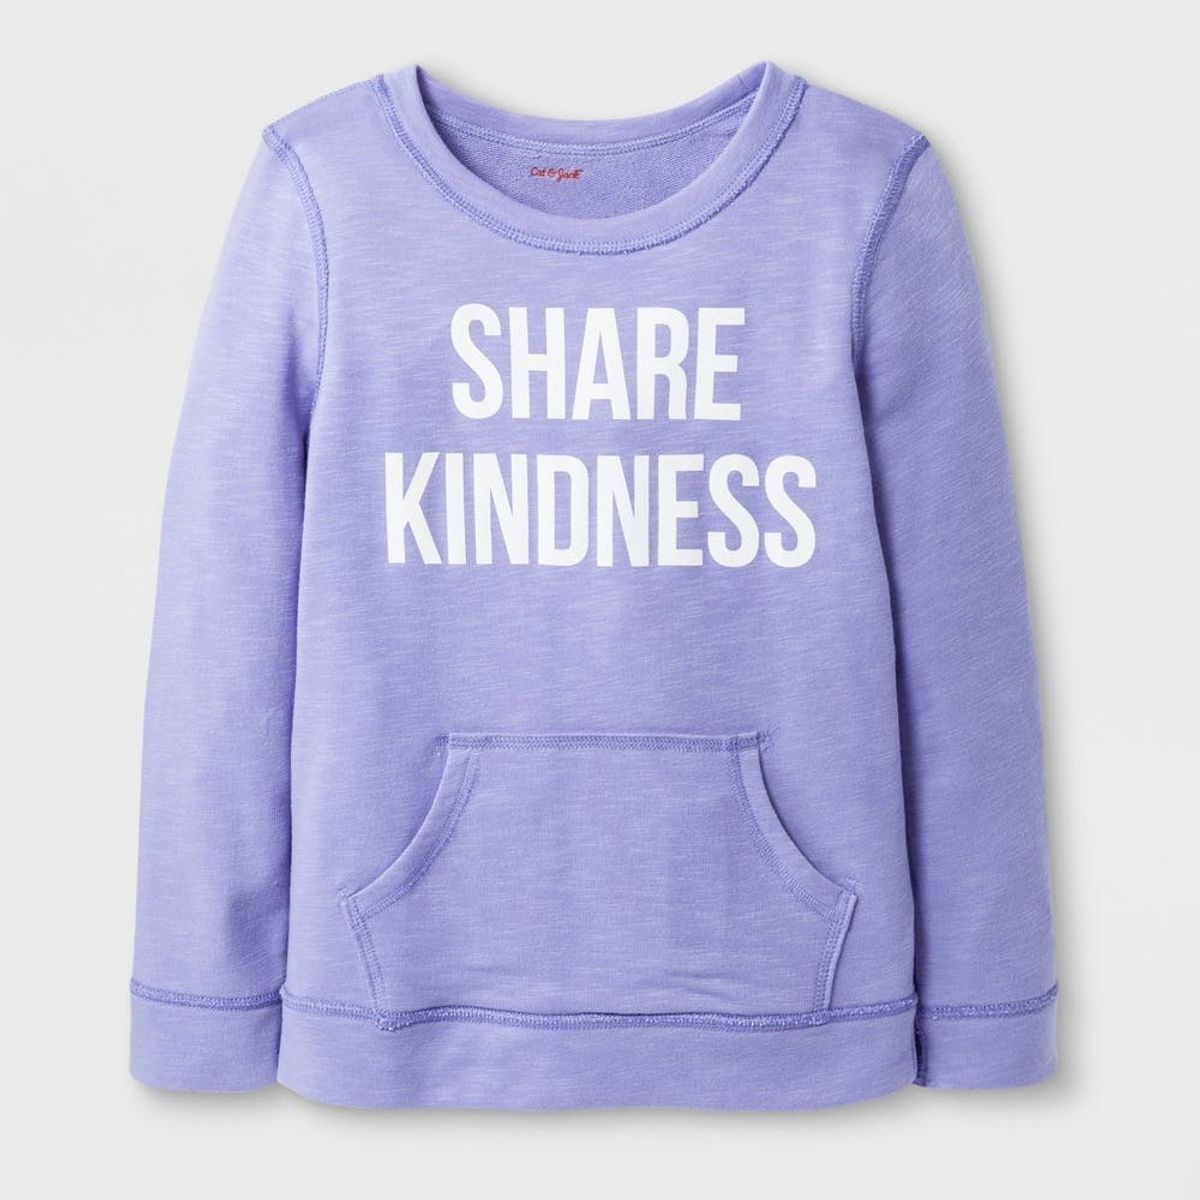 8 Fashionable Picks for Adaptive Kids’ Clothes